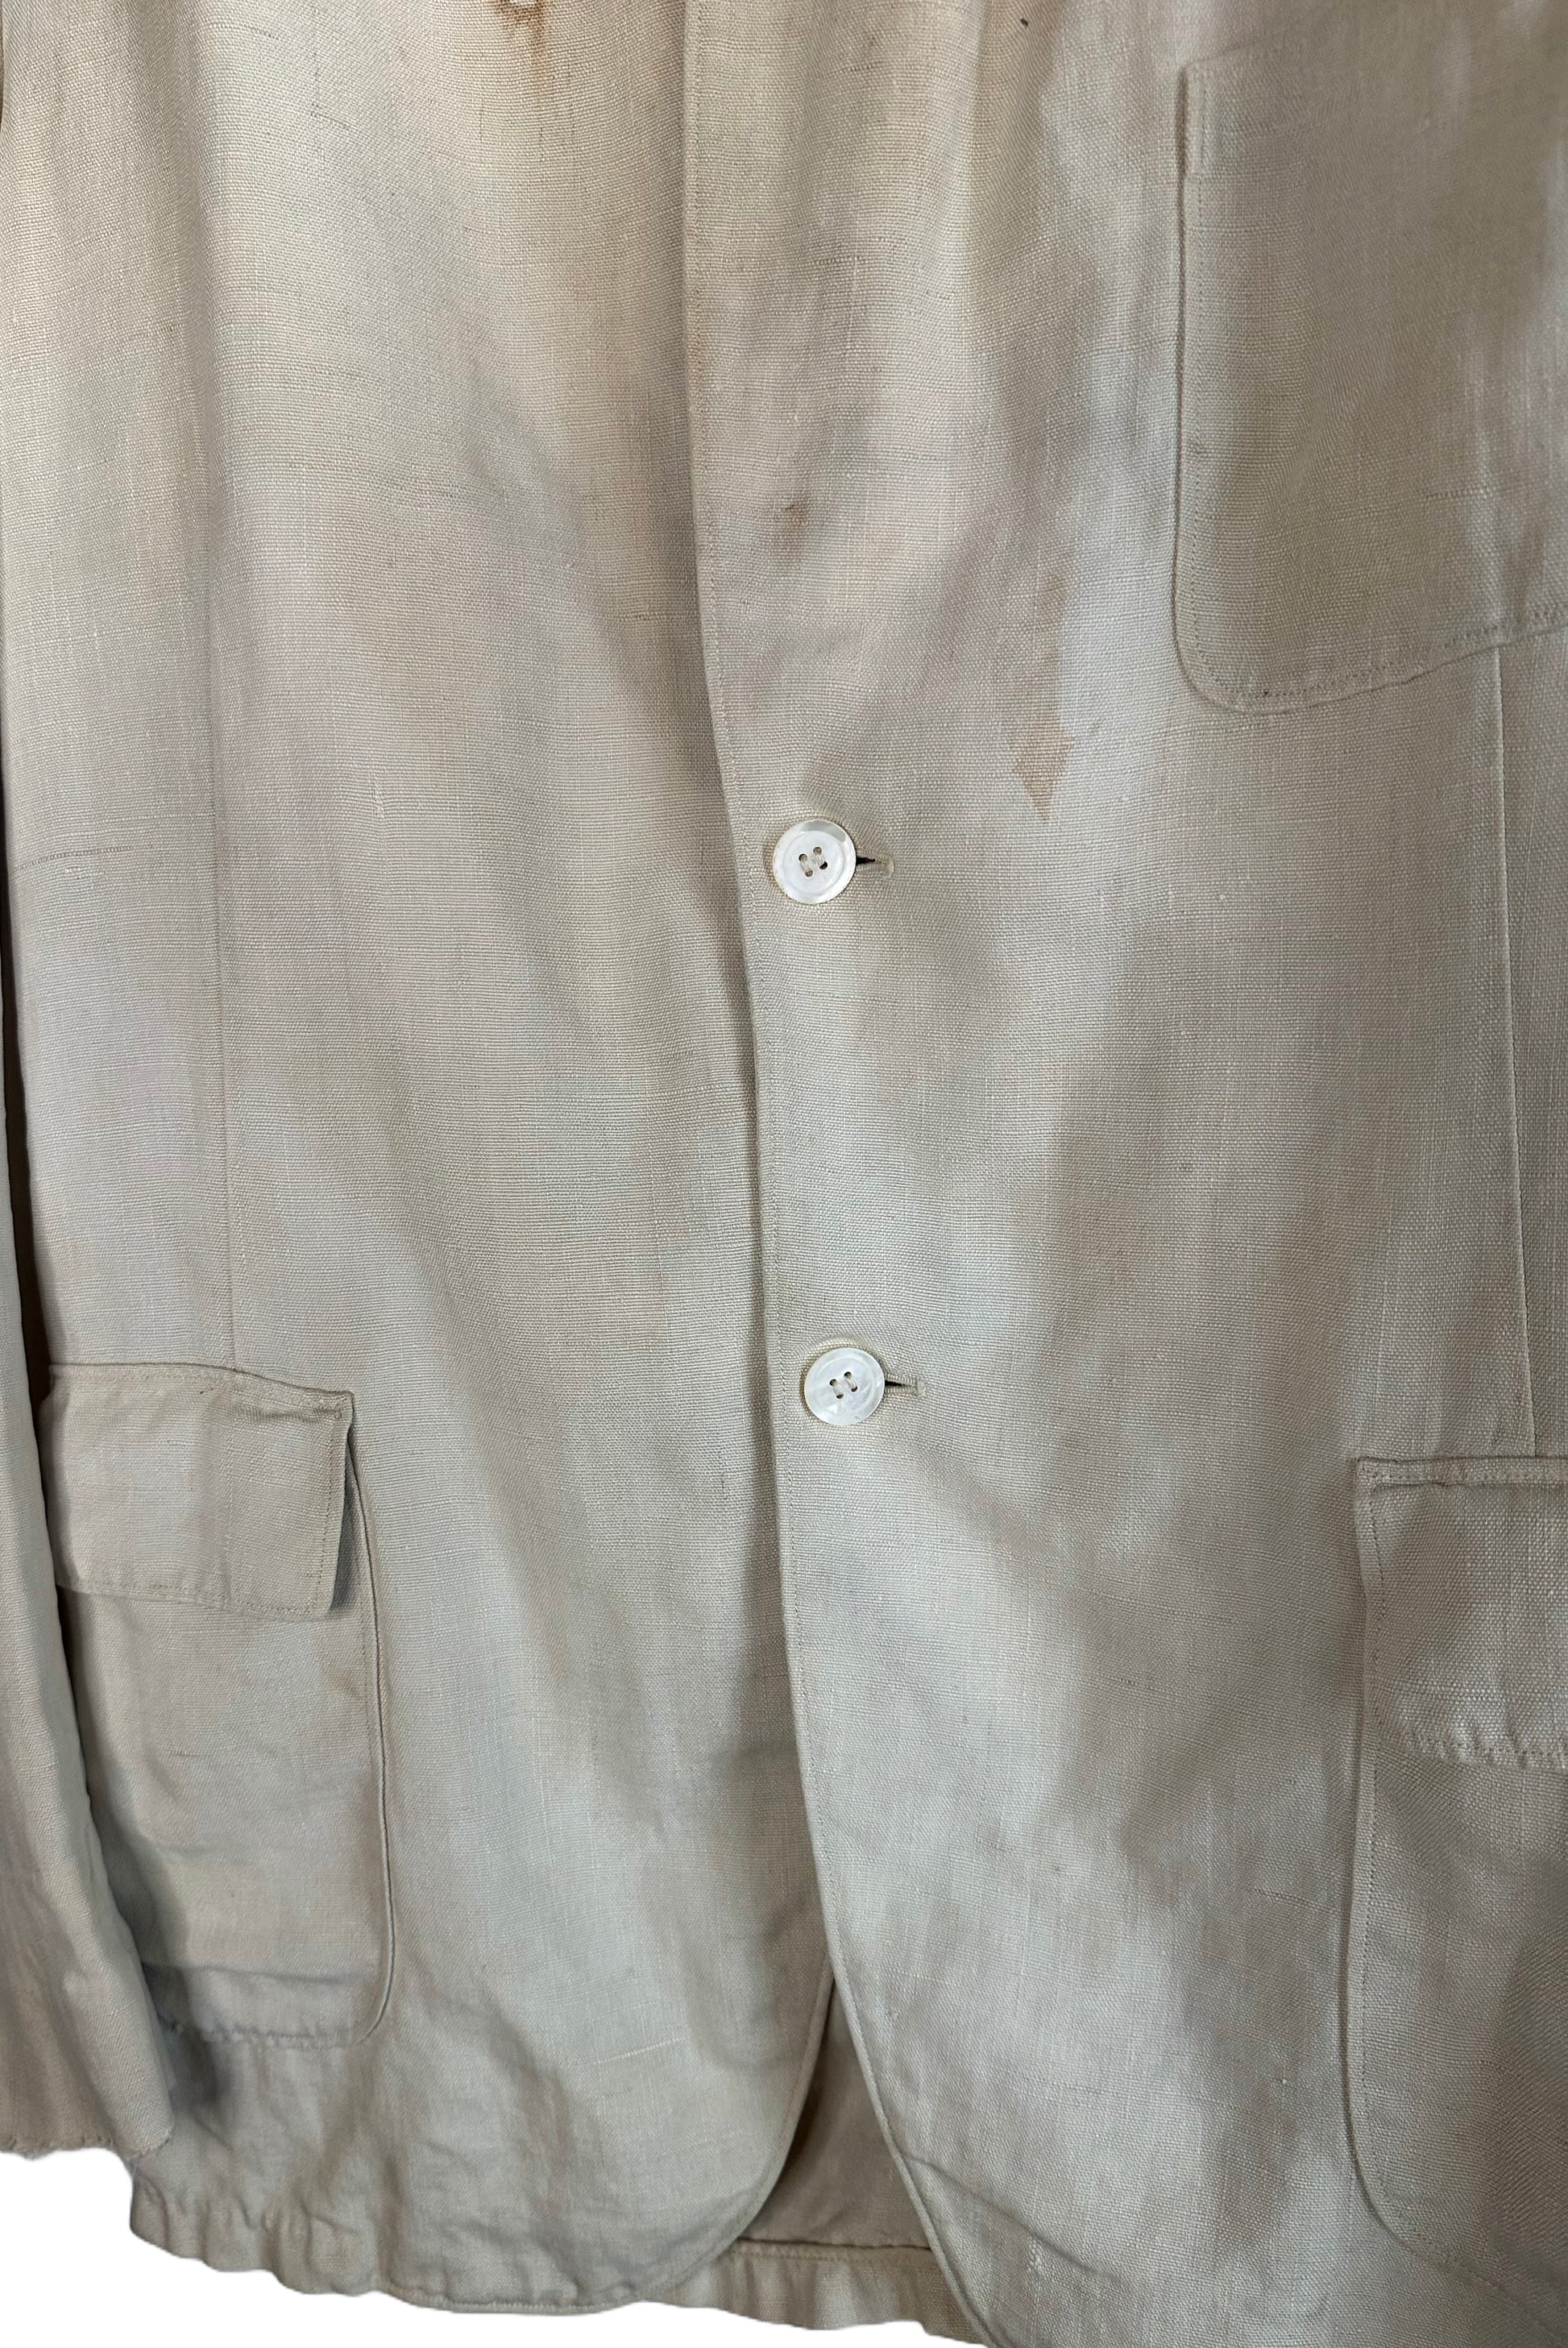 close up of stains and buttons , white round 